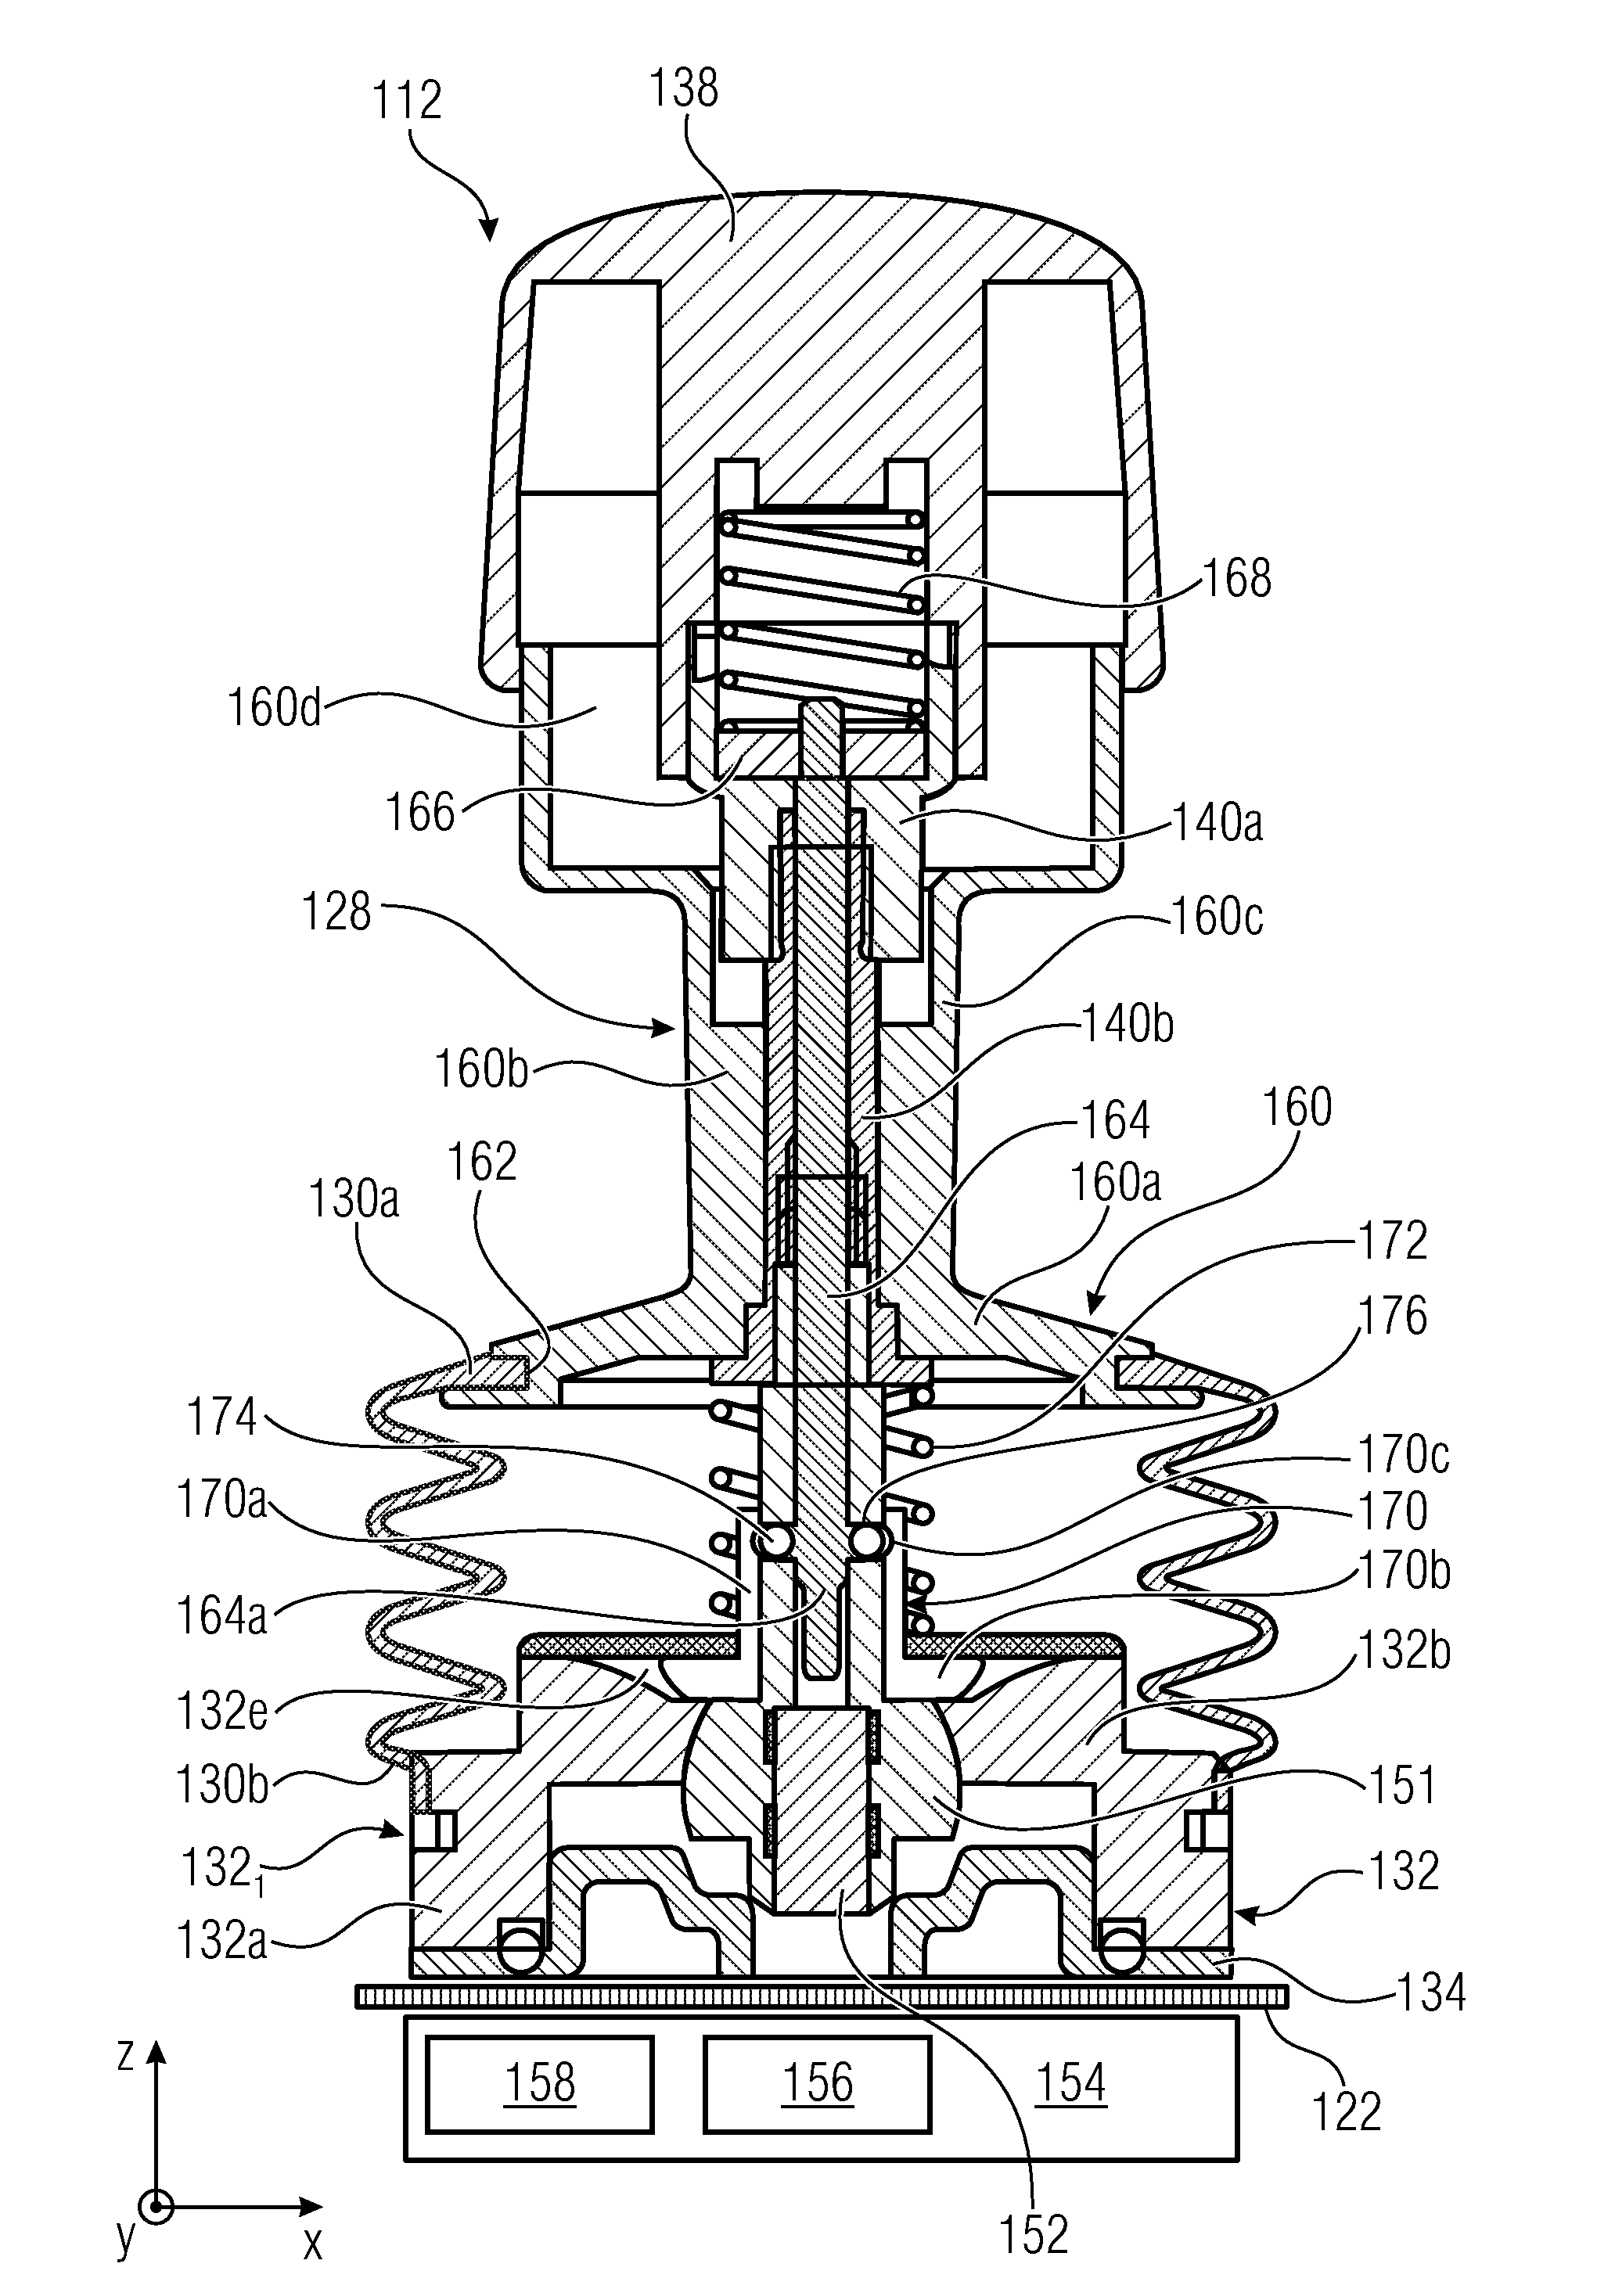 Manual control device, control and operating unit including a manual control device, and work machine or construction machine